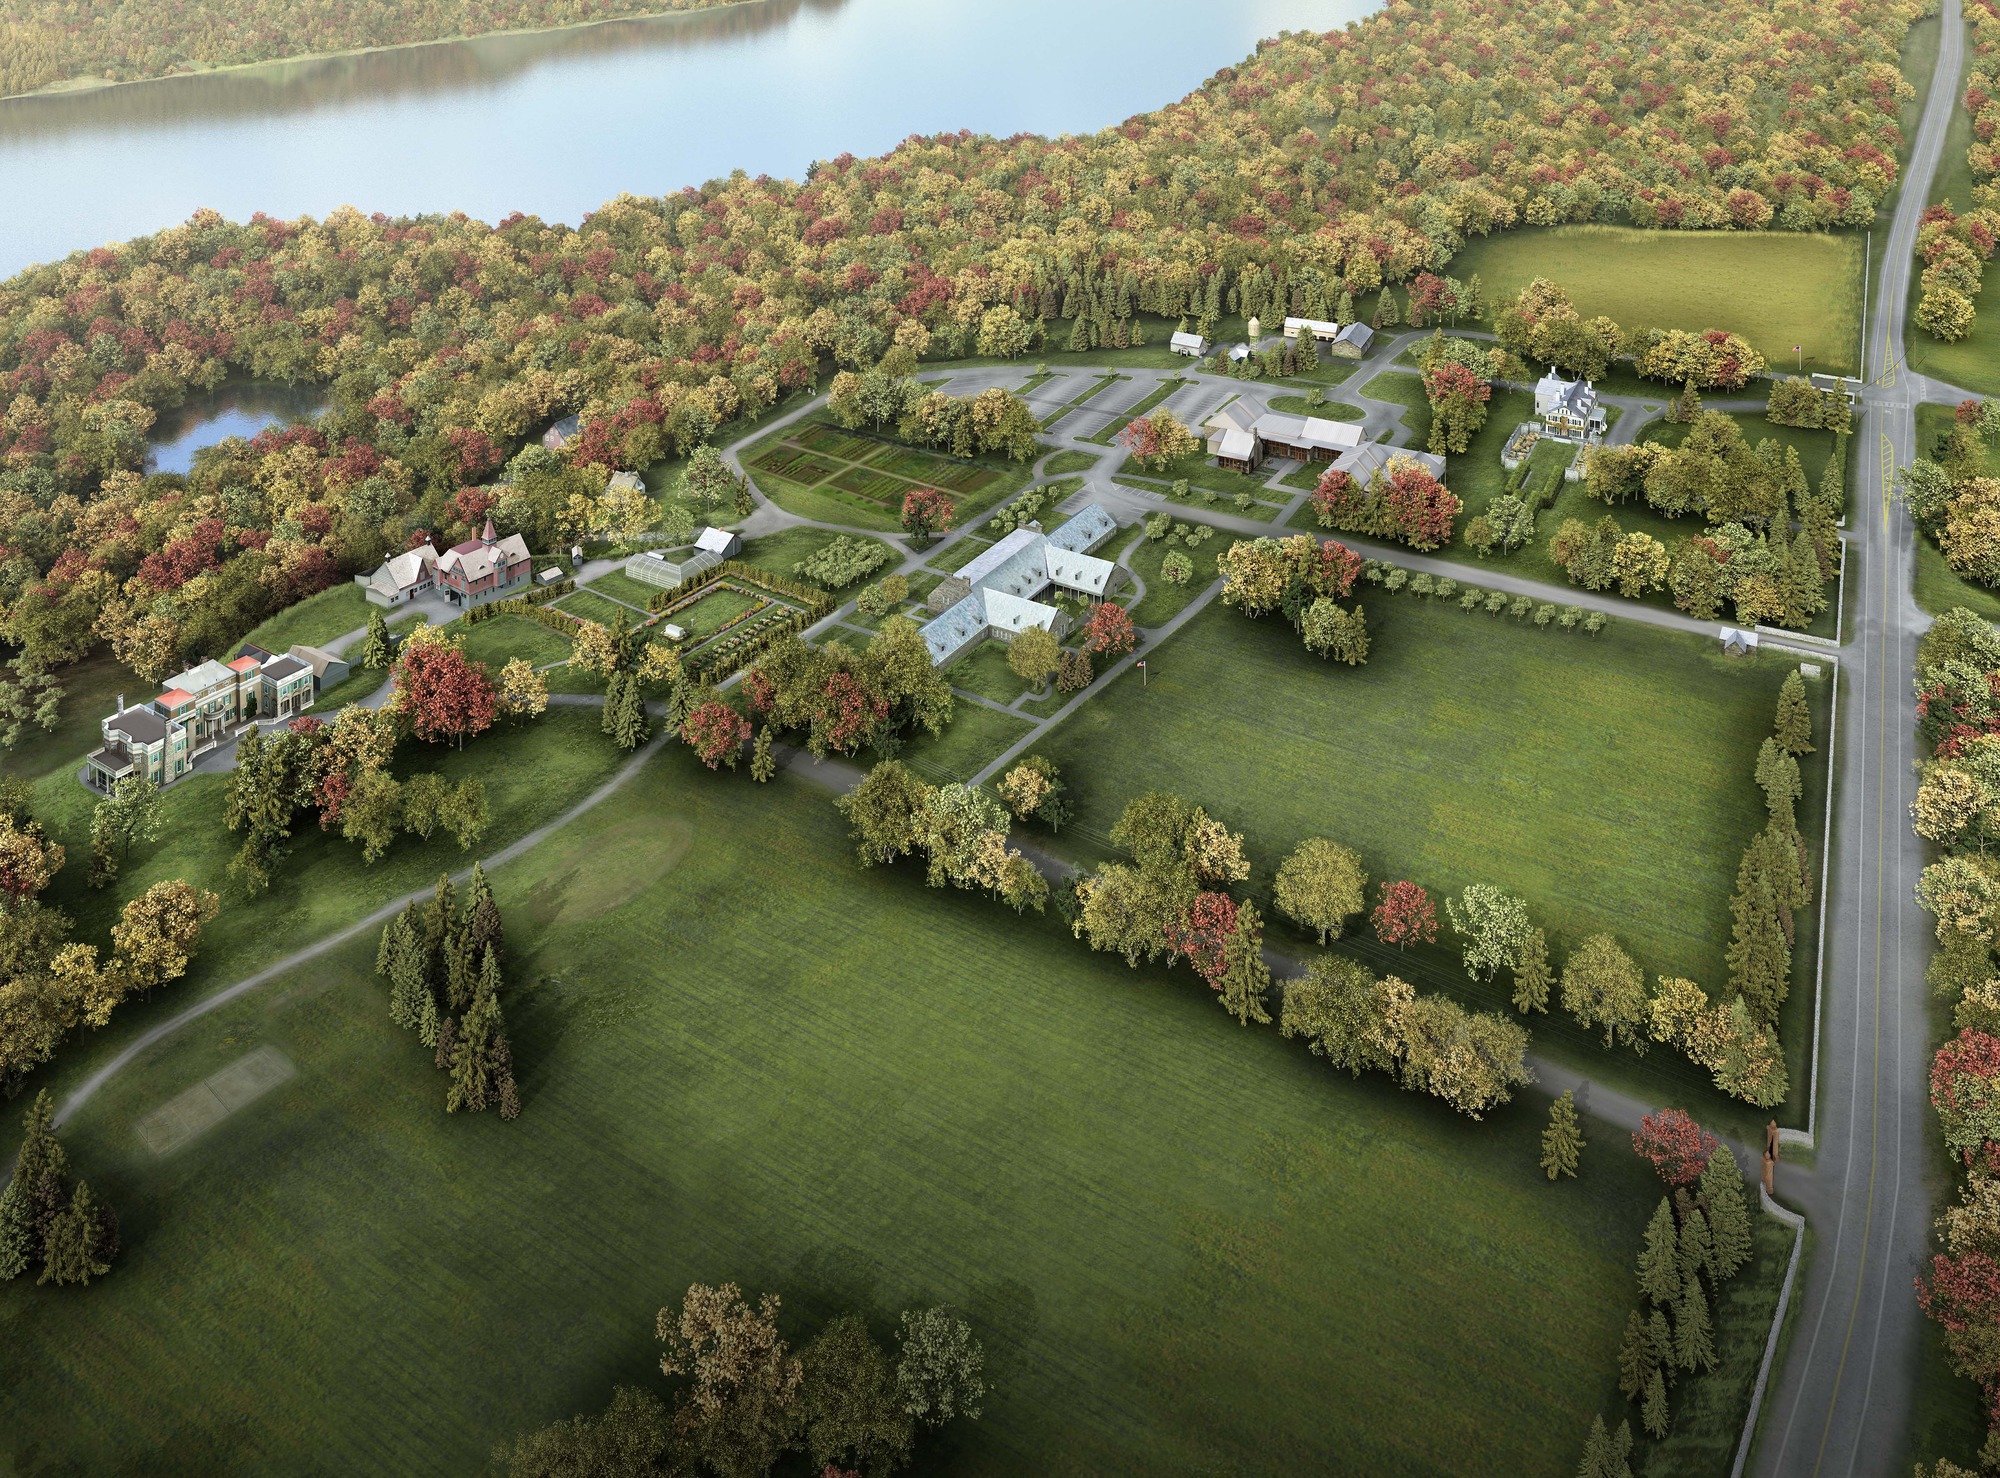 An artist's rendering of a birdseye view of the park nestled between the Hudson River and Route 9 to each side. The map includes roads, parking lots, gardens, the visitor center, the Roosevelt home, the Presidential LIbrary, and several garages and stables. 